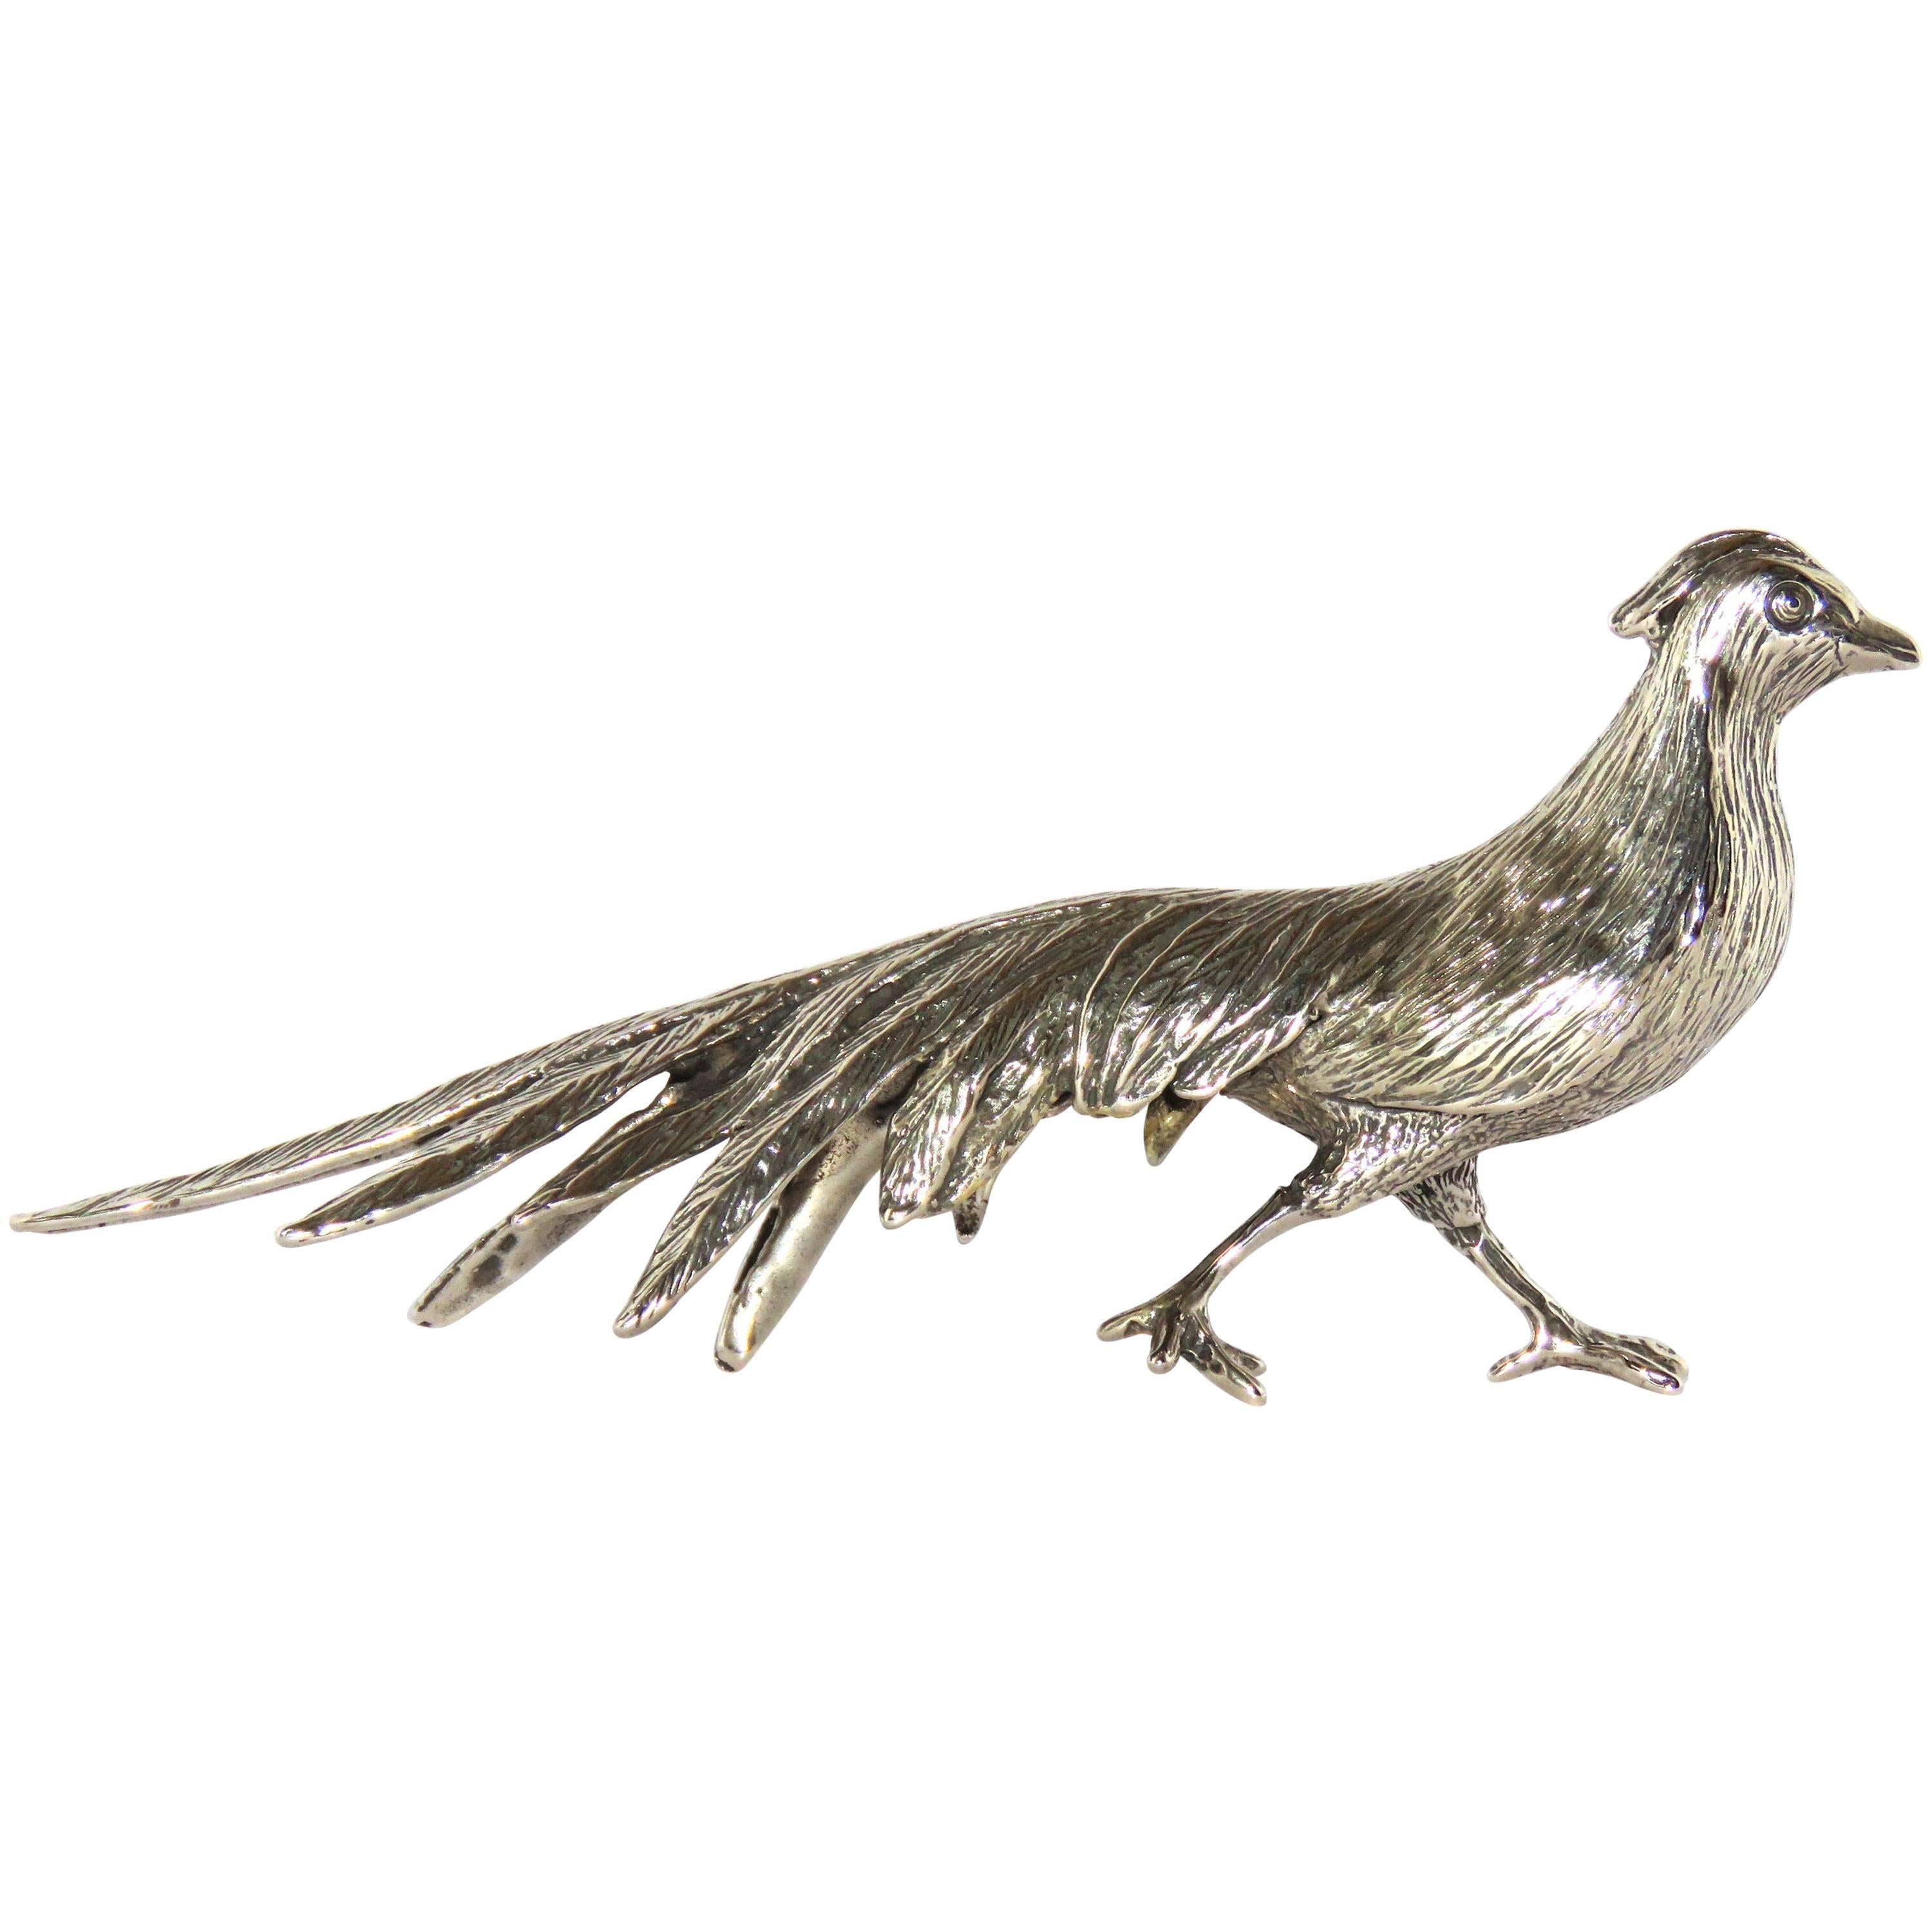 Solid Silver Figurines Model of a Peacock Made in Italy